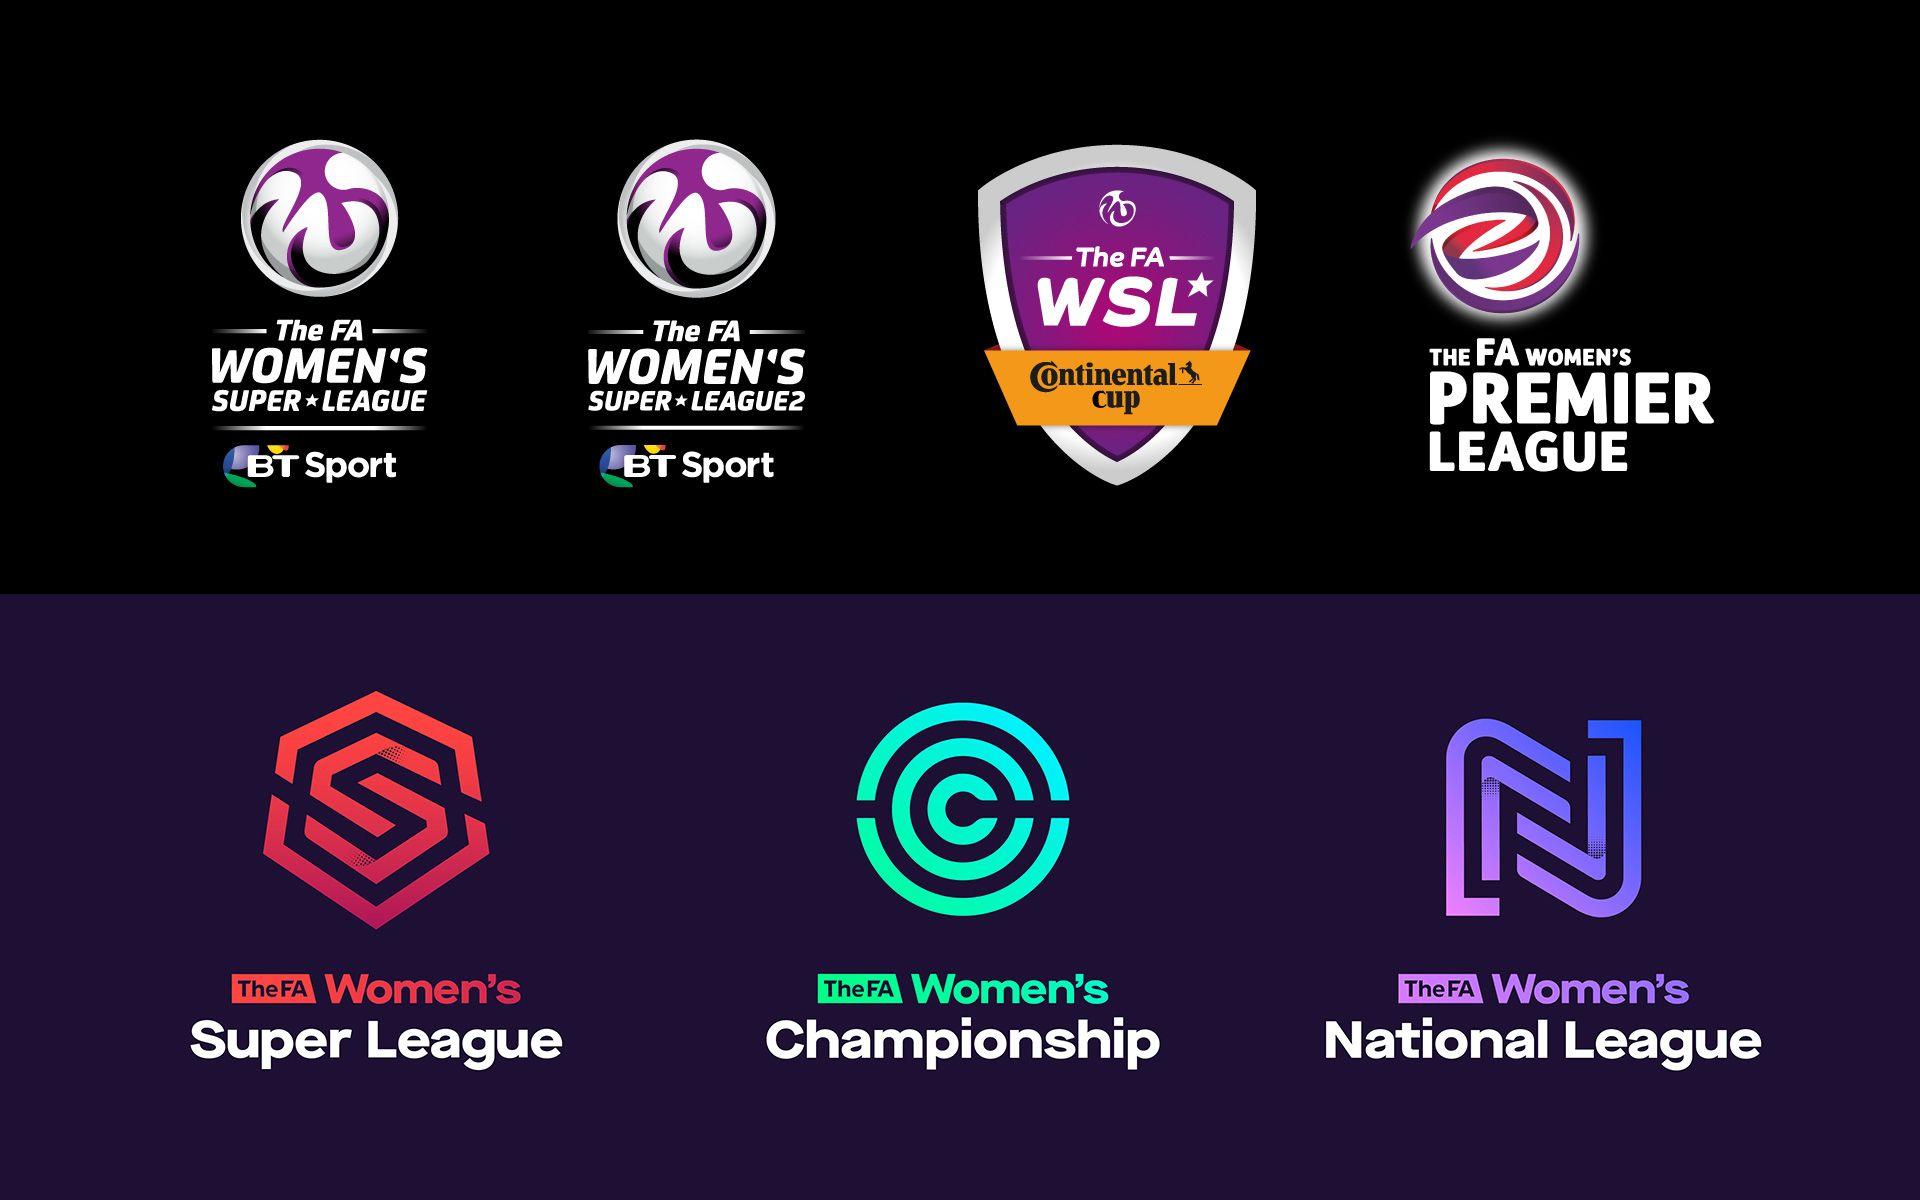 League Logo - Brand New: New Logos and Identity for FA Women's Leagues